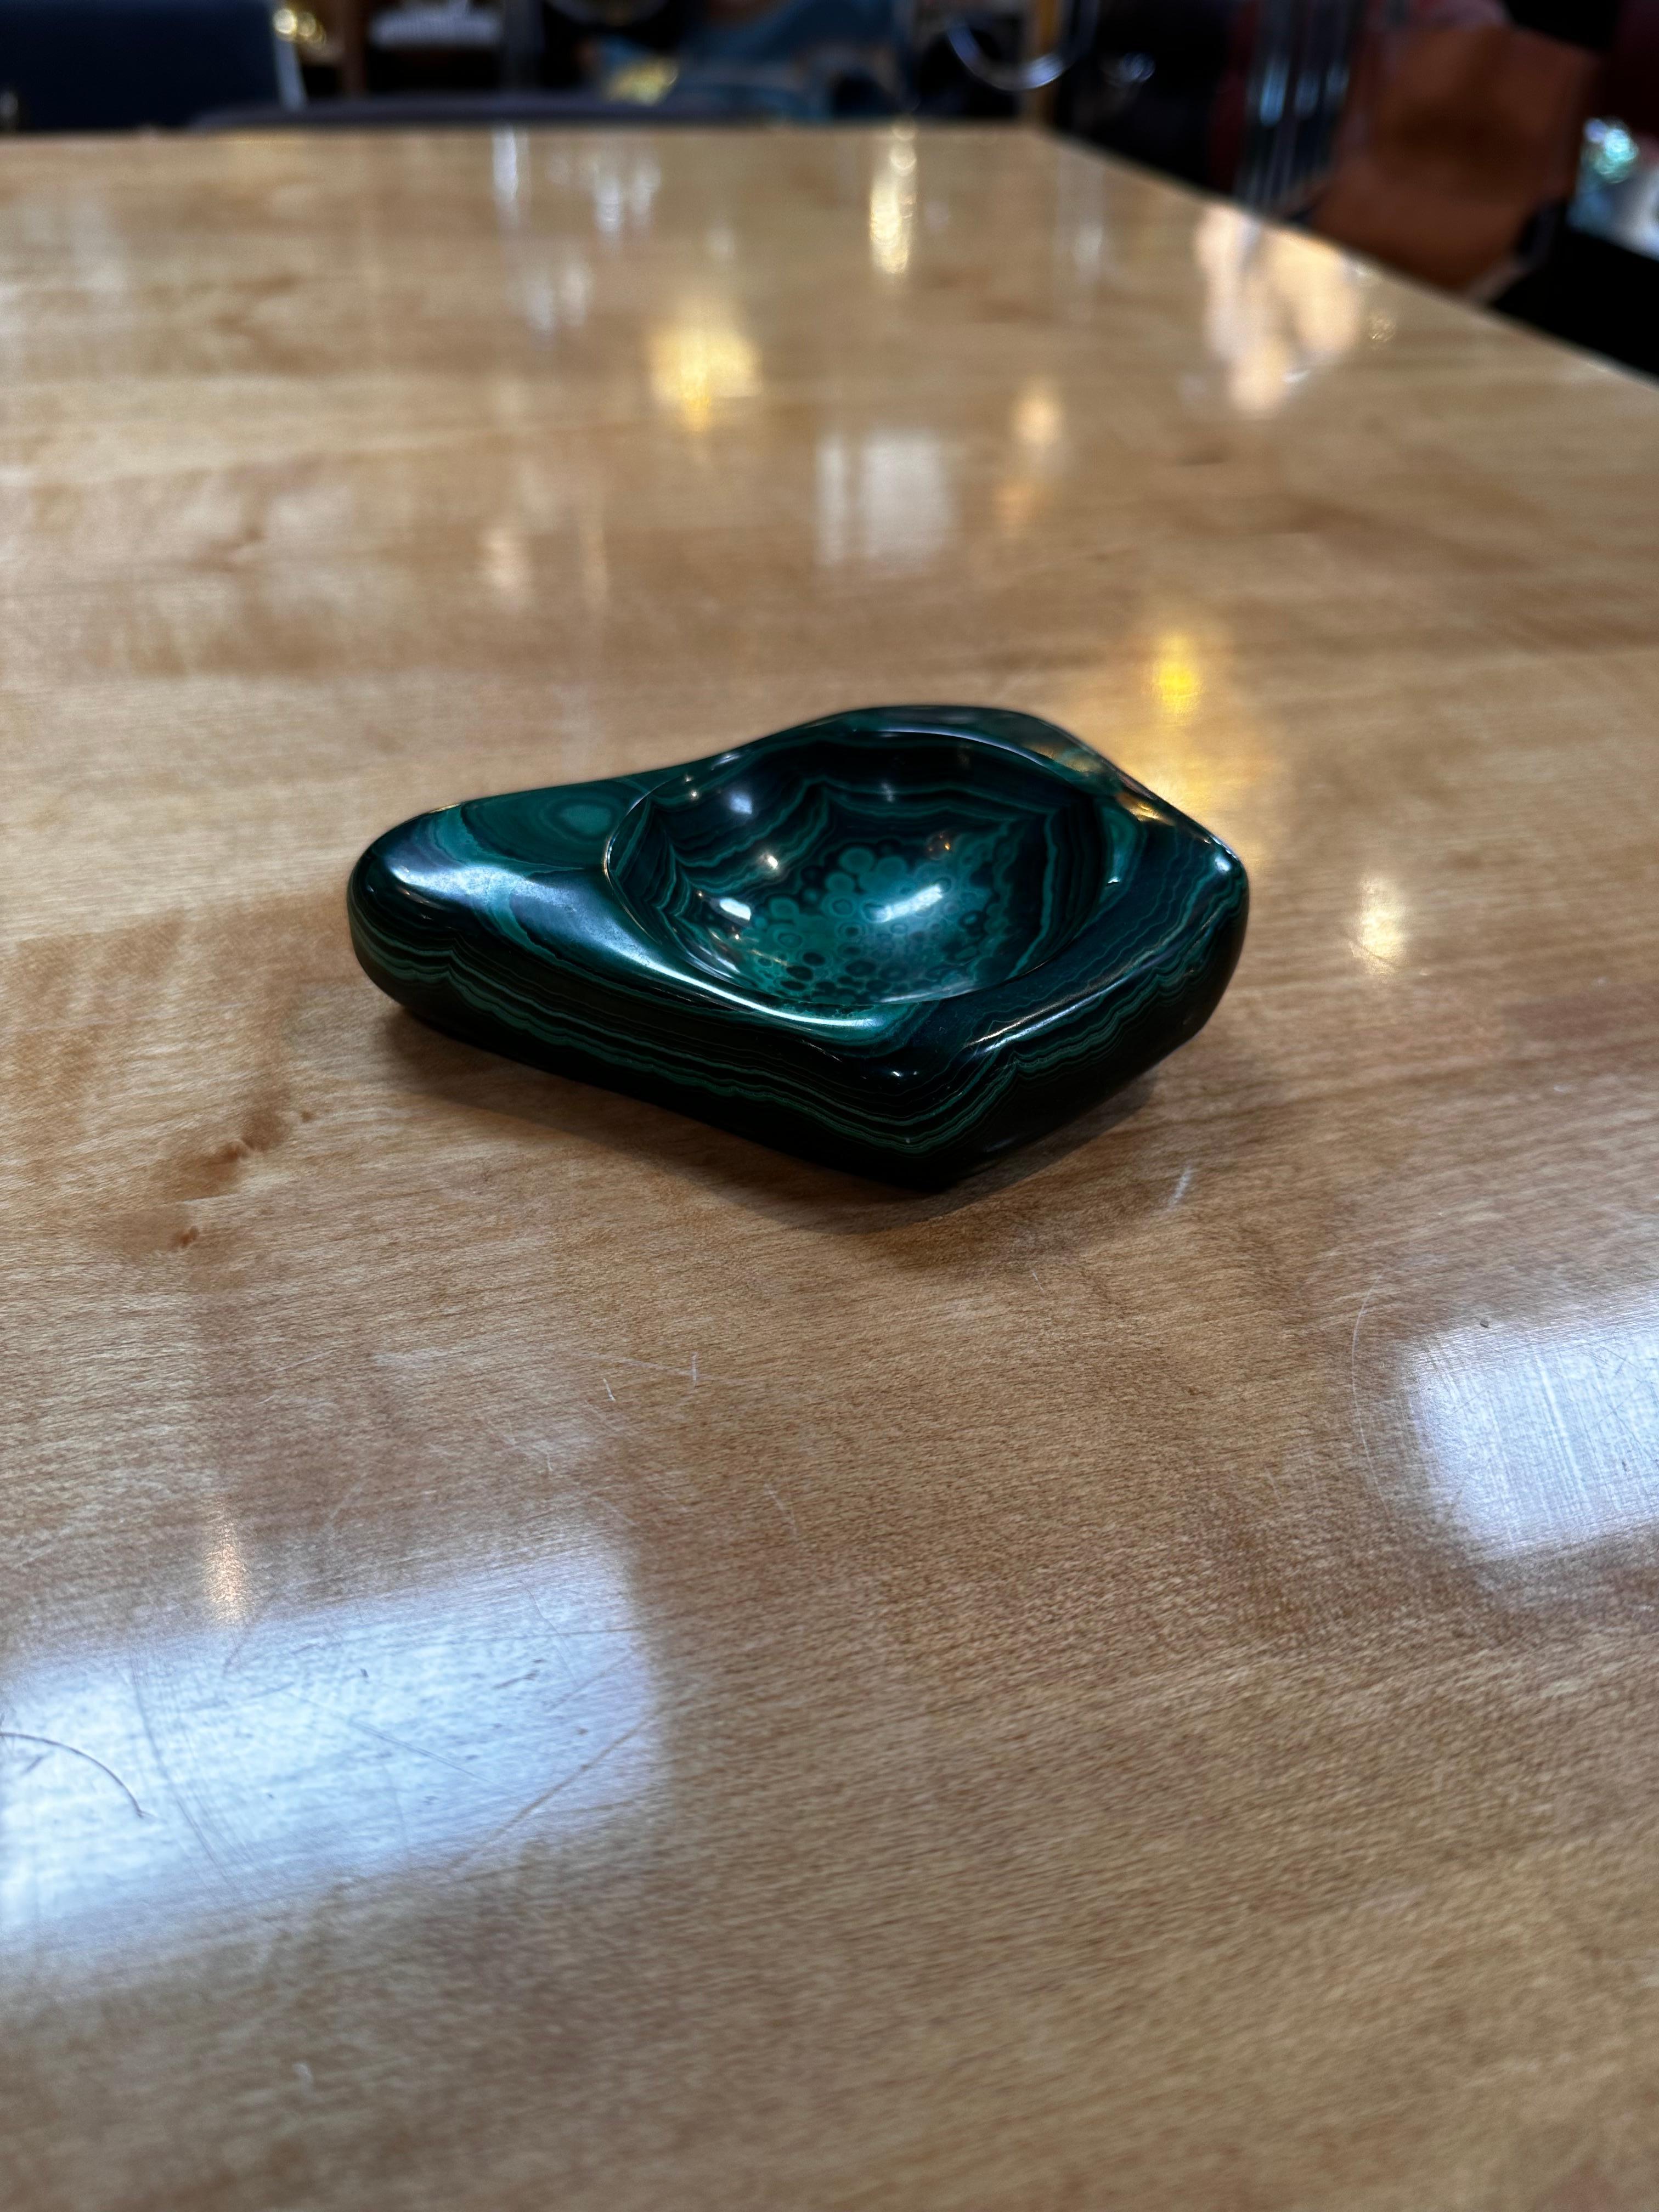 The Vintage Italian Malachite Ashtray from the 1960s is a unique and eye-catching piece of decorative art. Crafted in Italy during the mid-20th century, the ashtray is made from malachite, a vibrant green mineral known for its distinctive color and